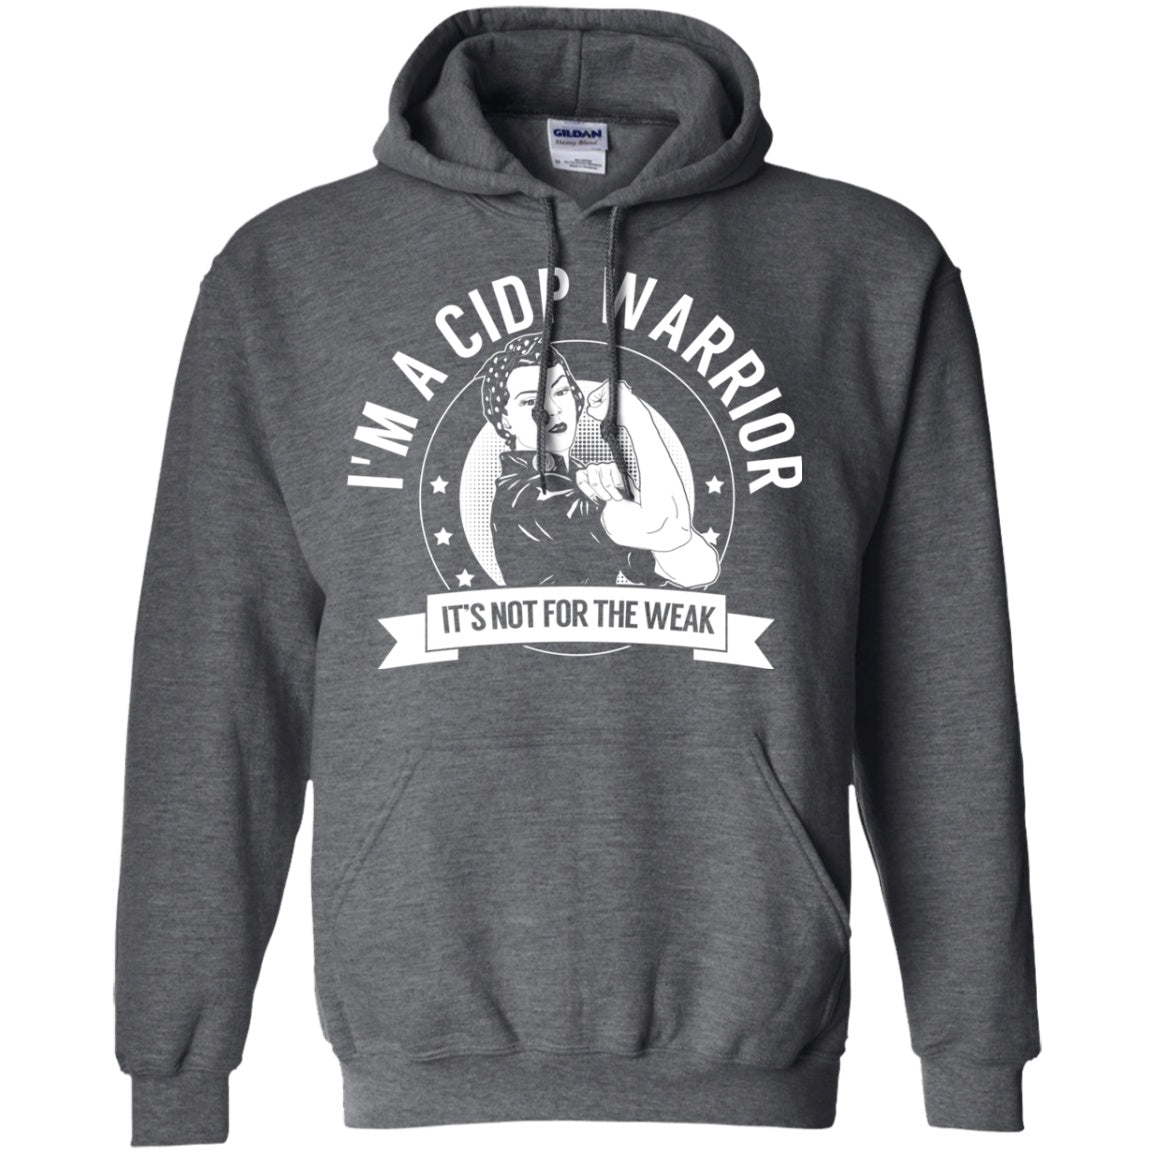 Chronic Inflammatory Demyelinating Polyneuropathy - CIDP Warrior NFTW Pullover Hoodie 8 oz. - The Unchargeables